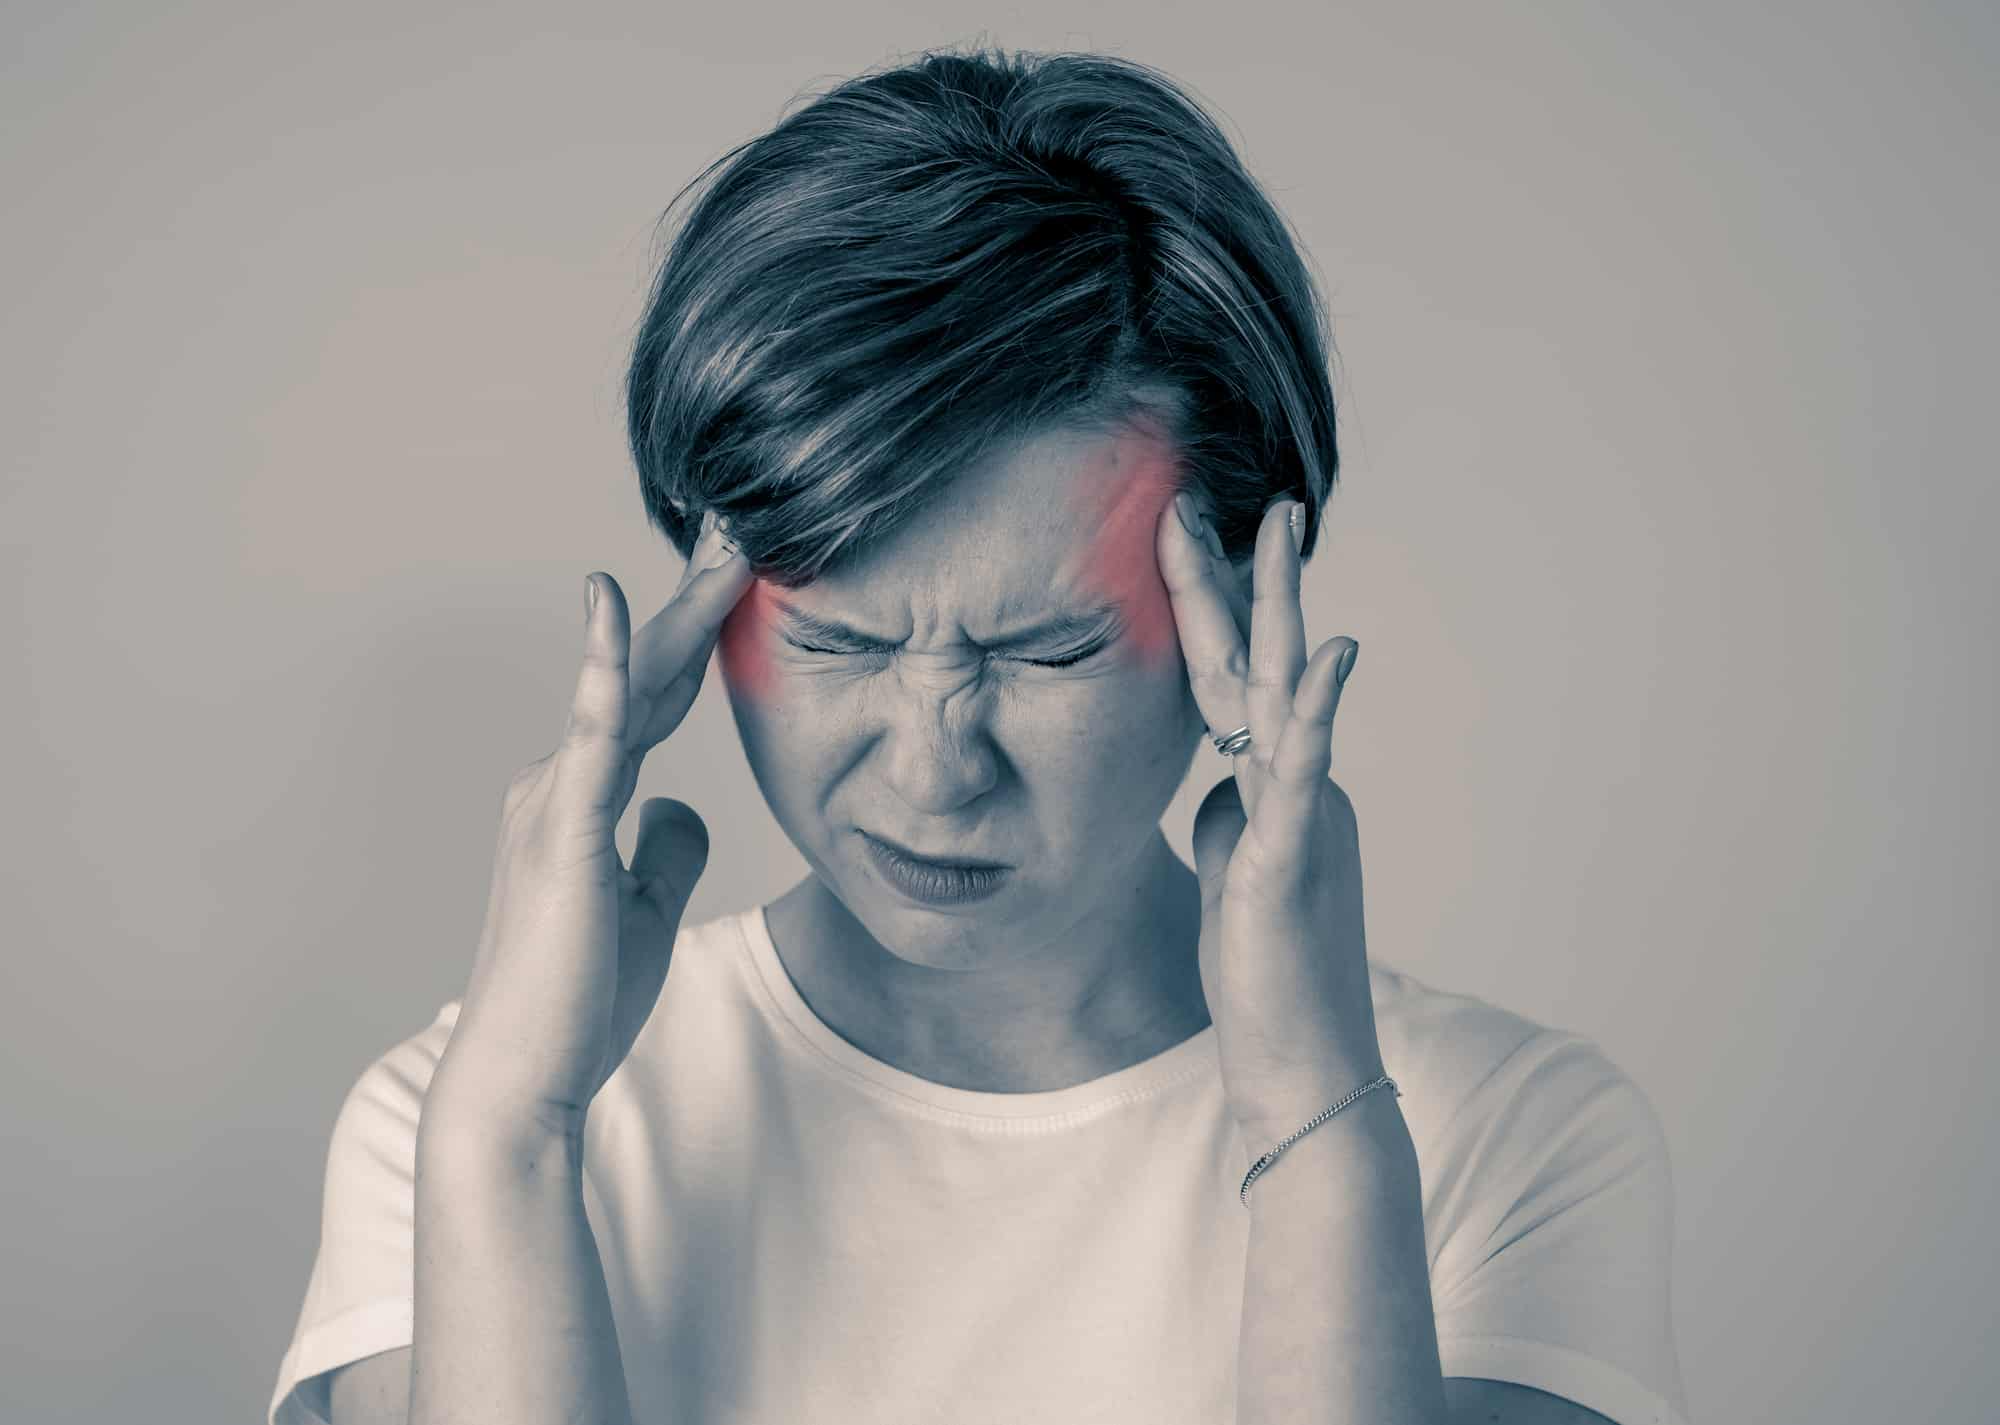 Headache Remedies: How To Get Long-Term Relief